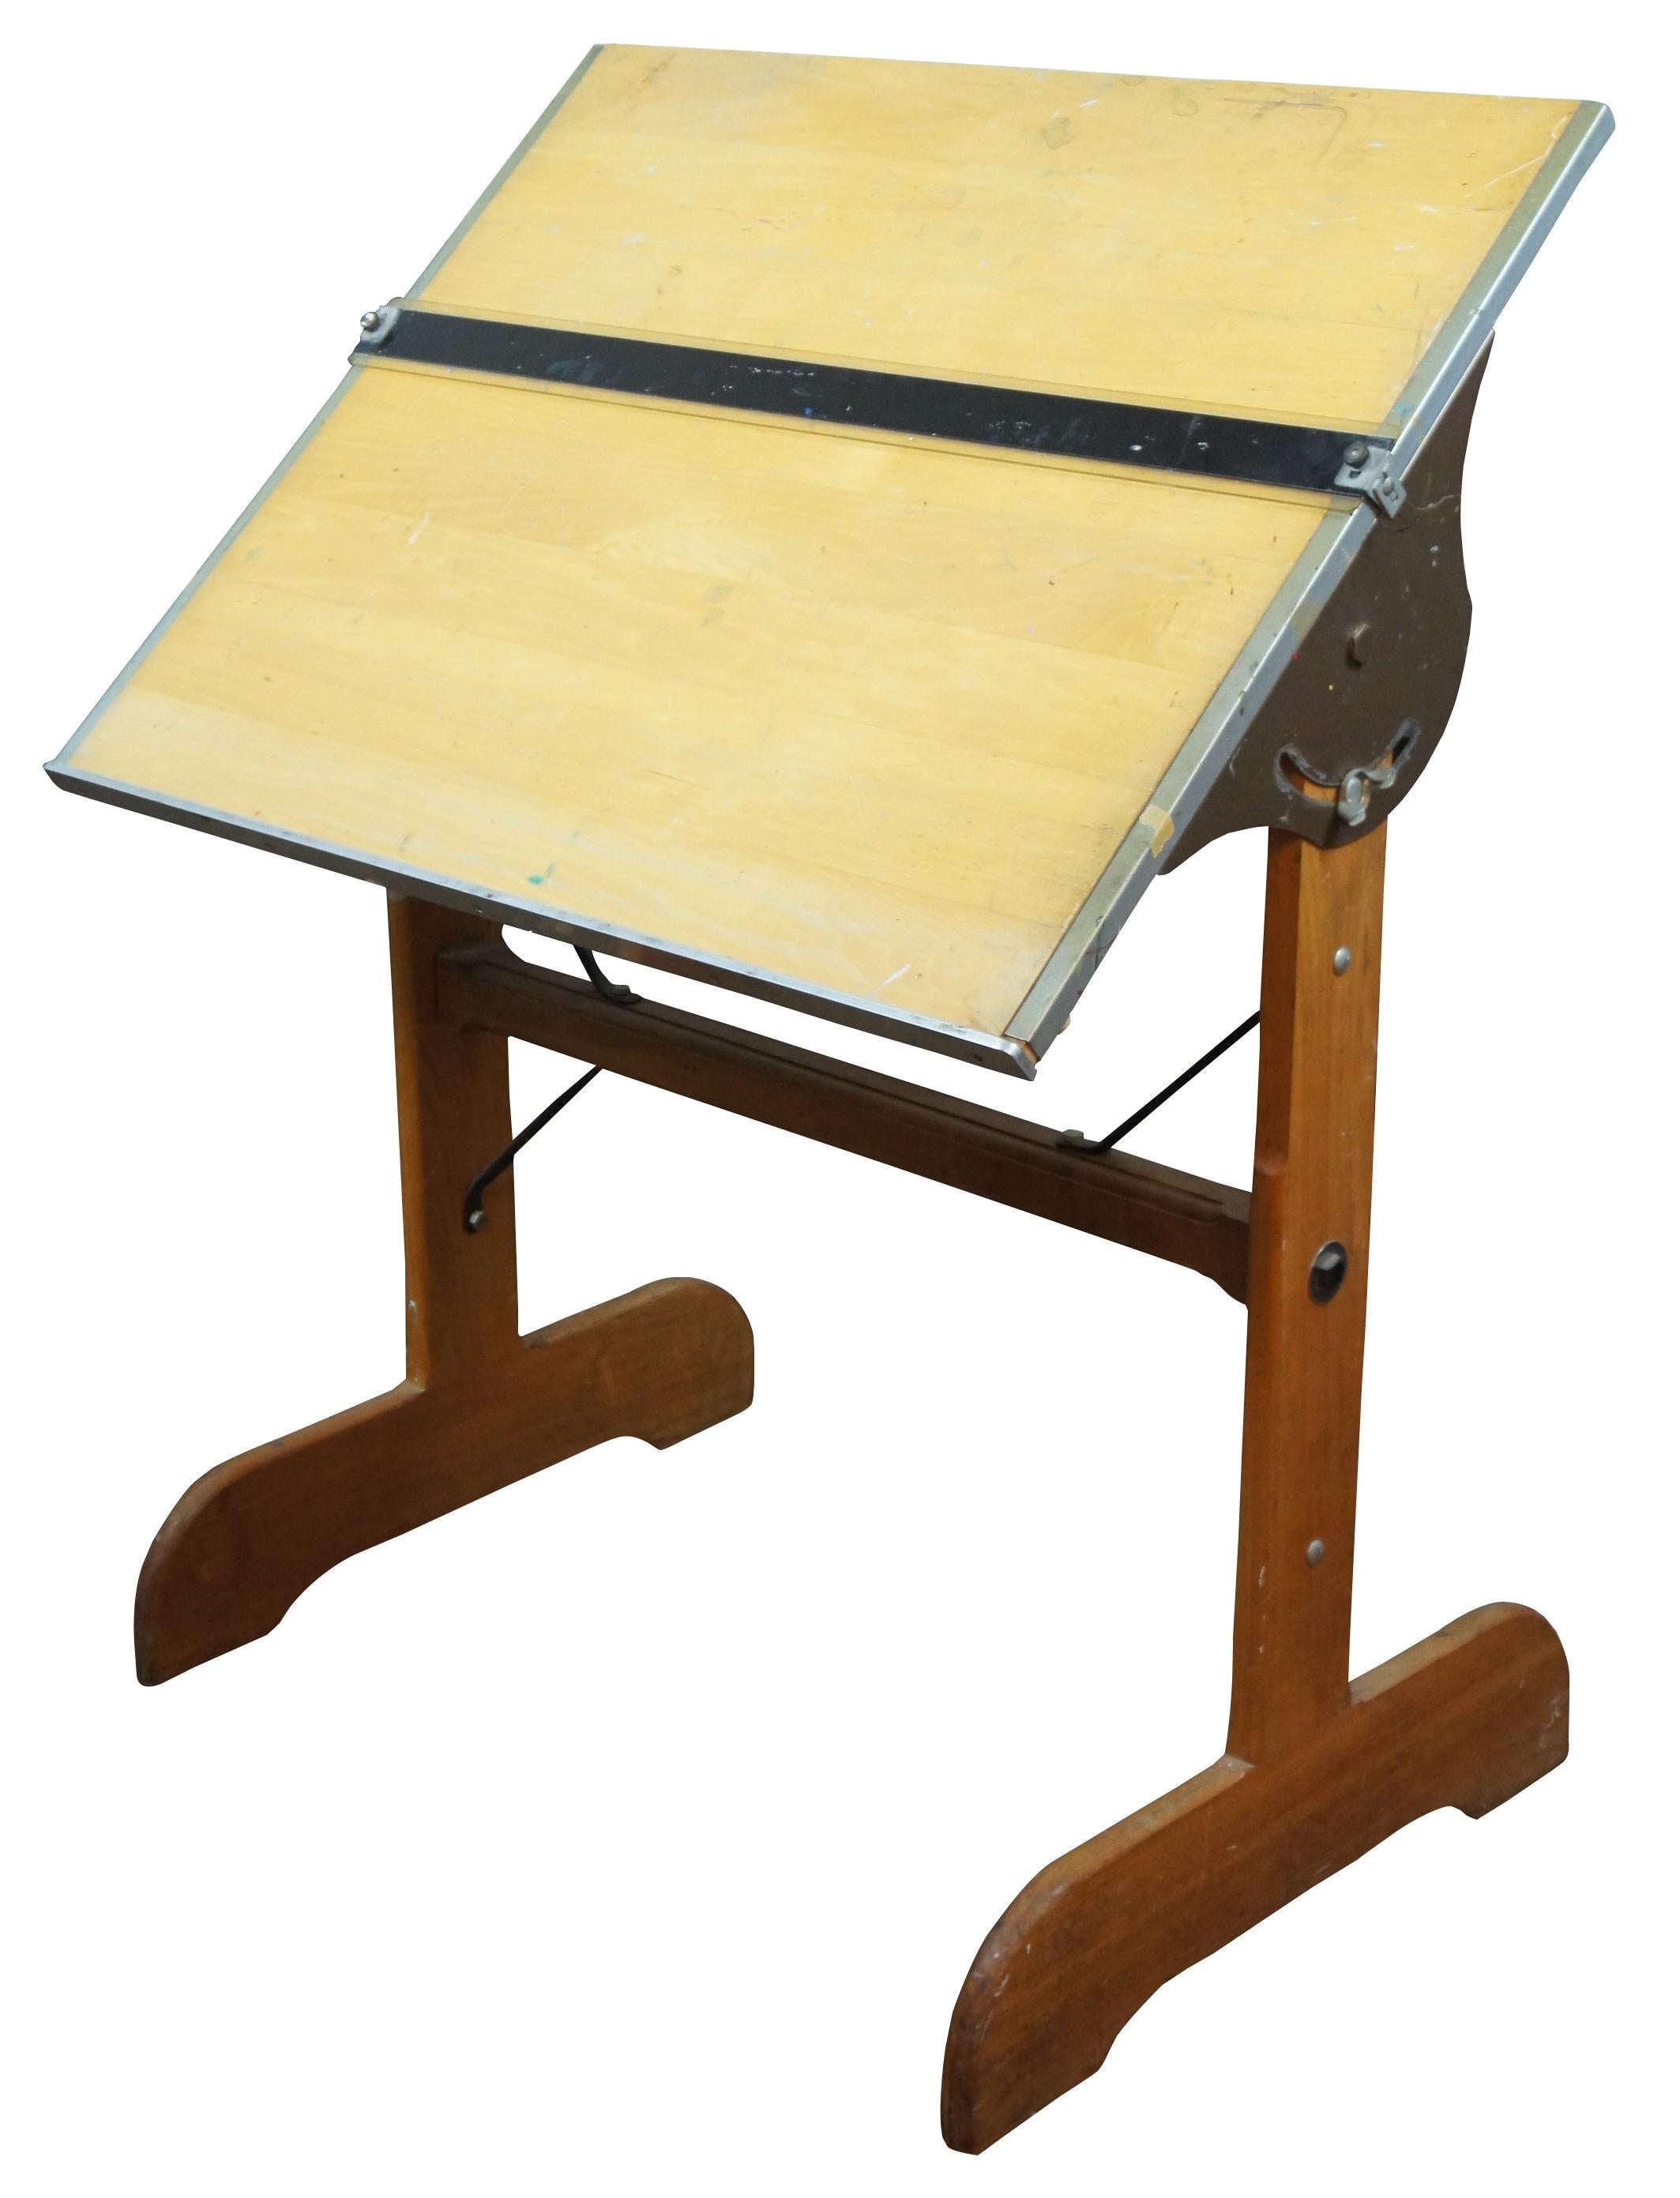 Vintage Mayfield Company Inc. industrial drafting table or architectural desk with wooden trestle legs, surface adjustable from 90 degrees vertical to 90 degrees horizontal, and horizontal straight edge slide. Sheboygan Wisconsin, Equipment for the